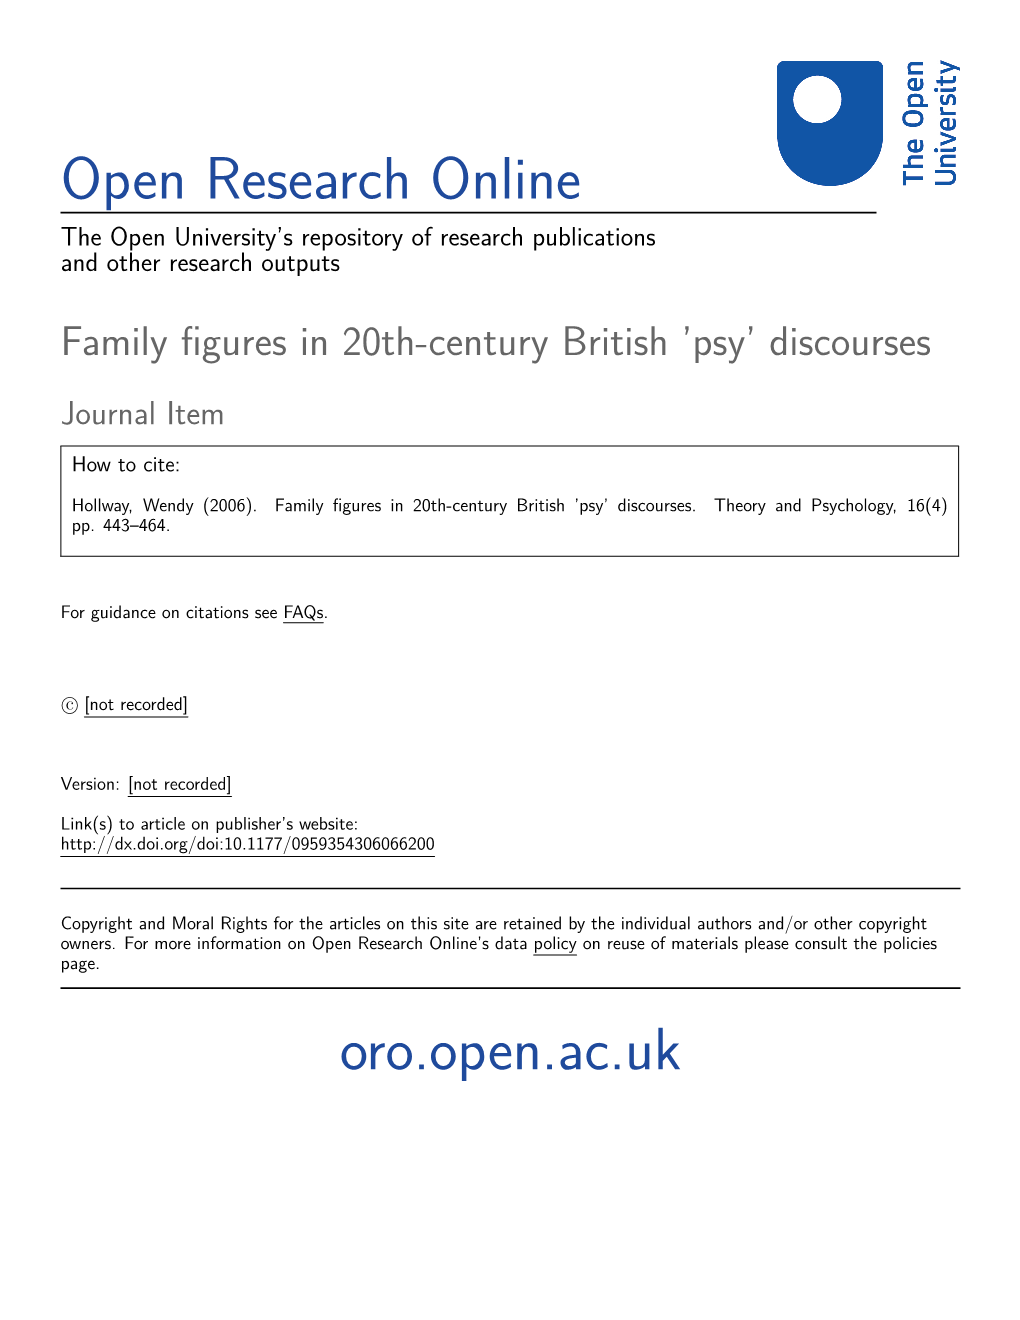 Family Figures in 20Th-Century British 'Psy' Discourses